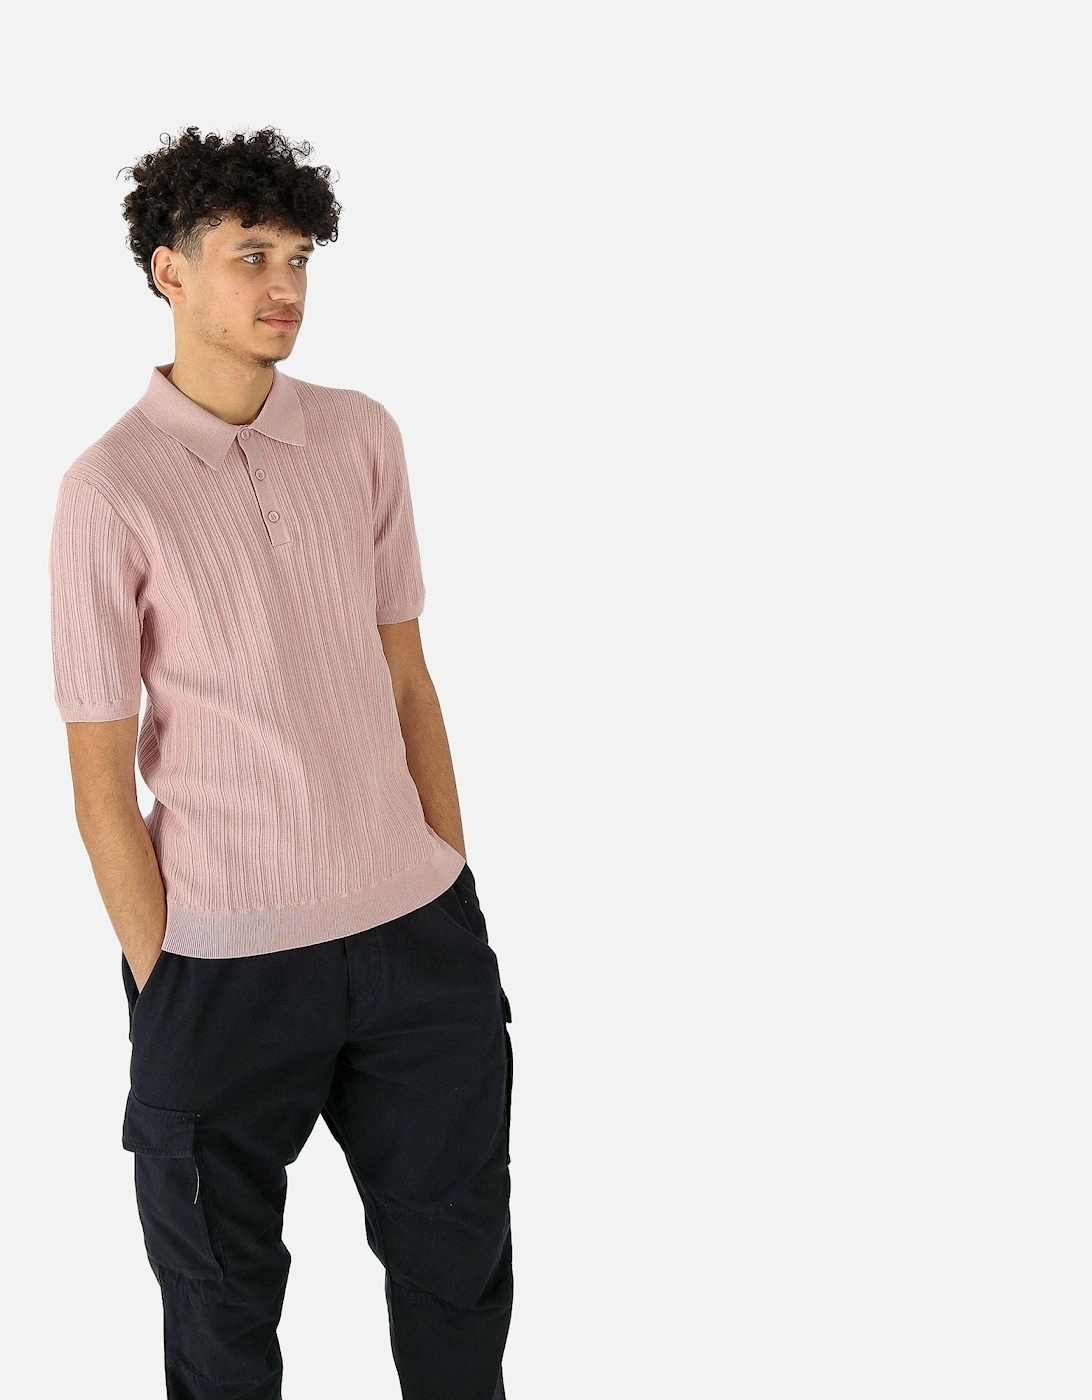 Naples Vertical Rib Knitted Pink Polo